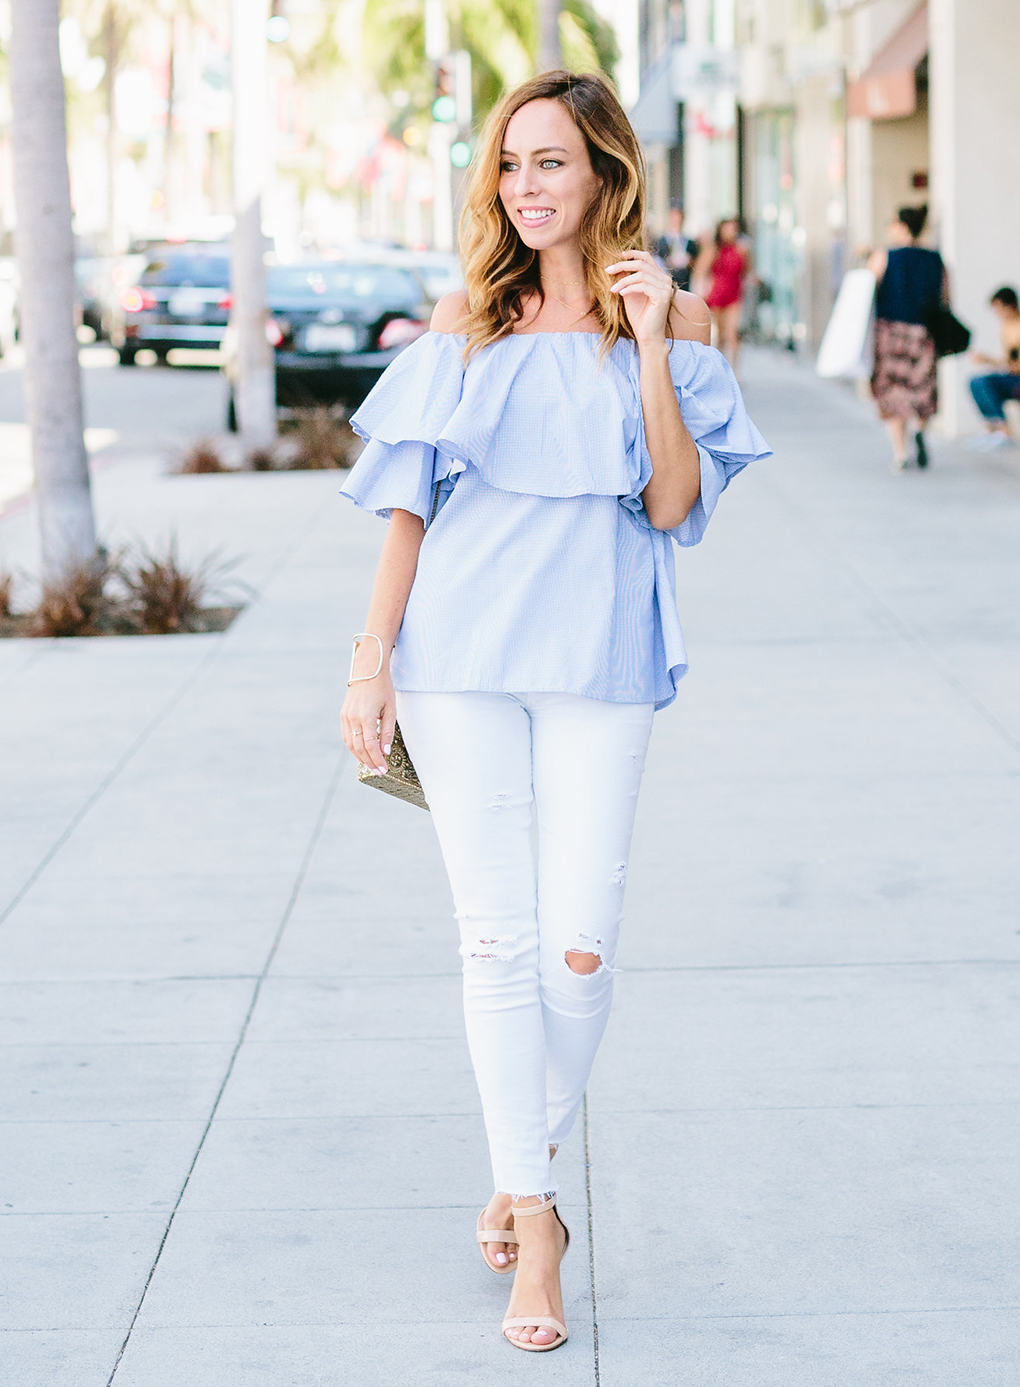 Sydne-Style-wears-ruffled-off-the-shoulder-top-for-summer-fashion-trends-street-style